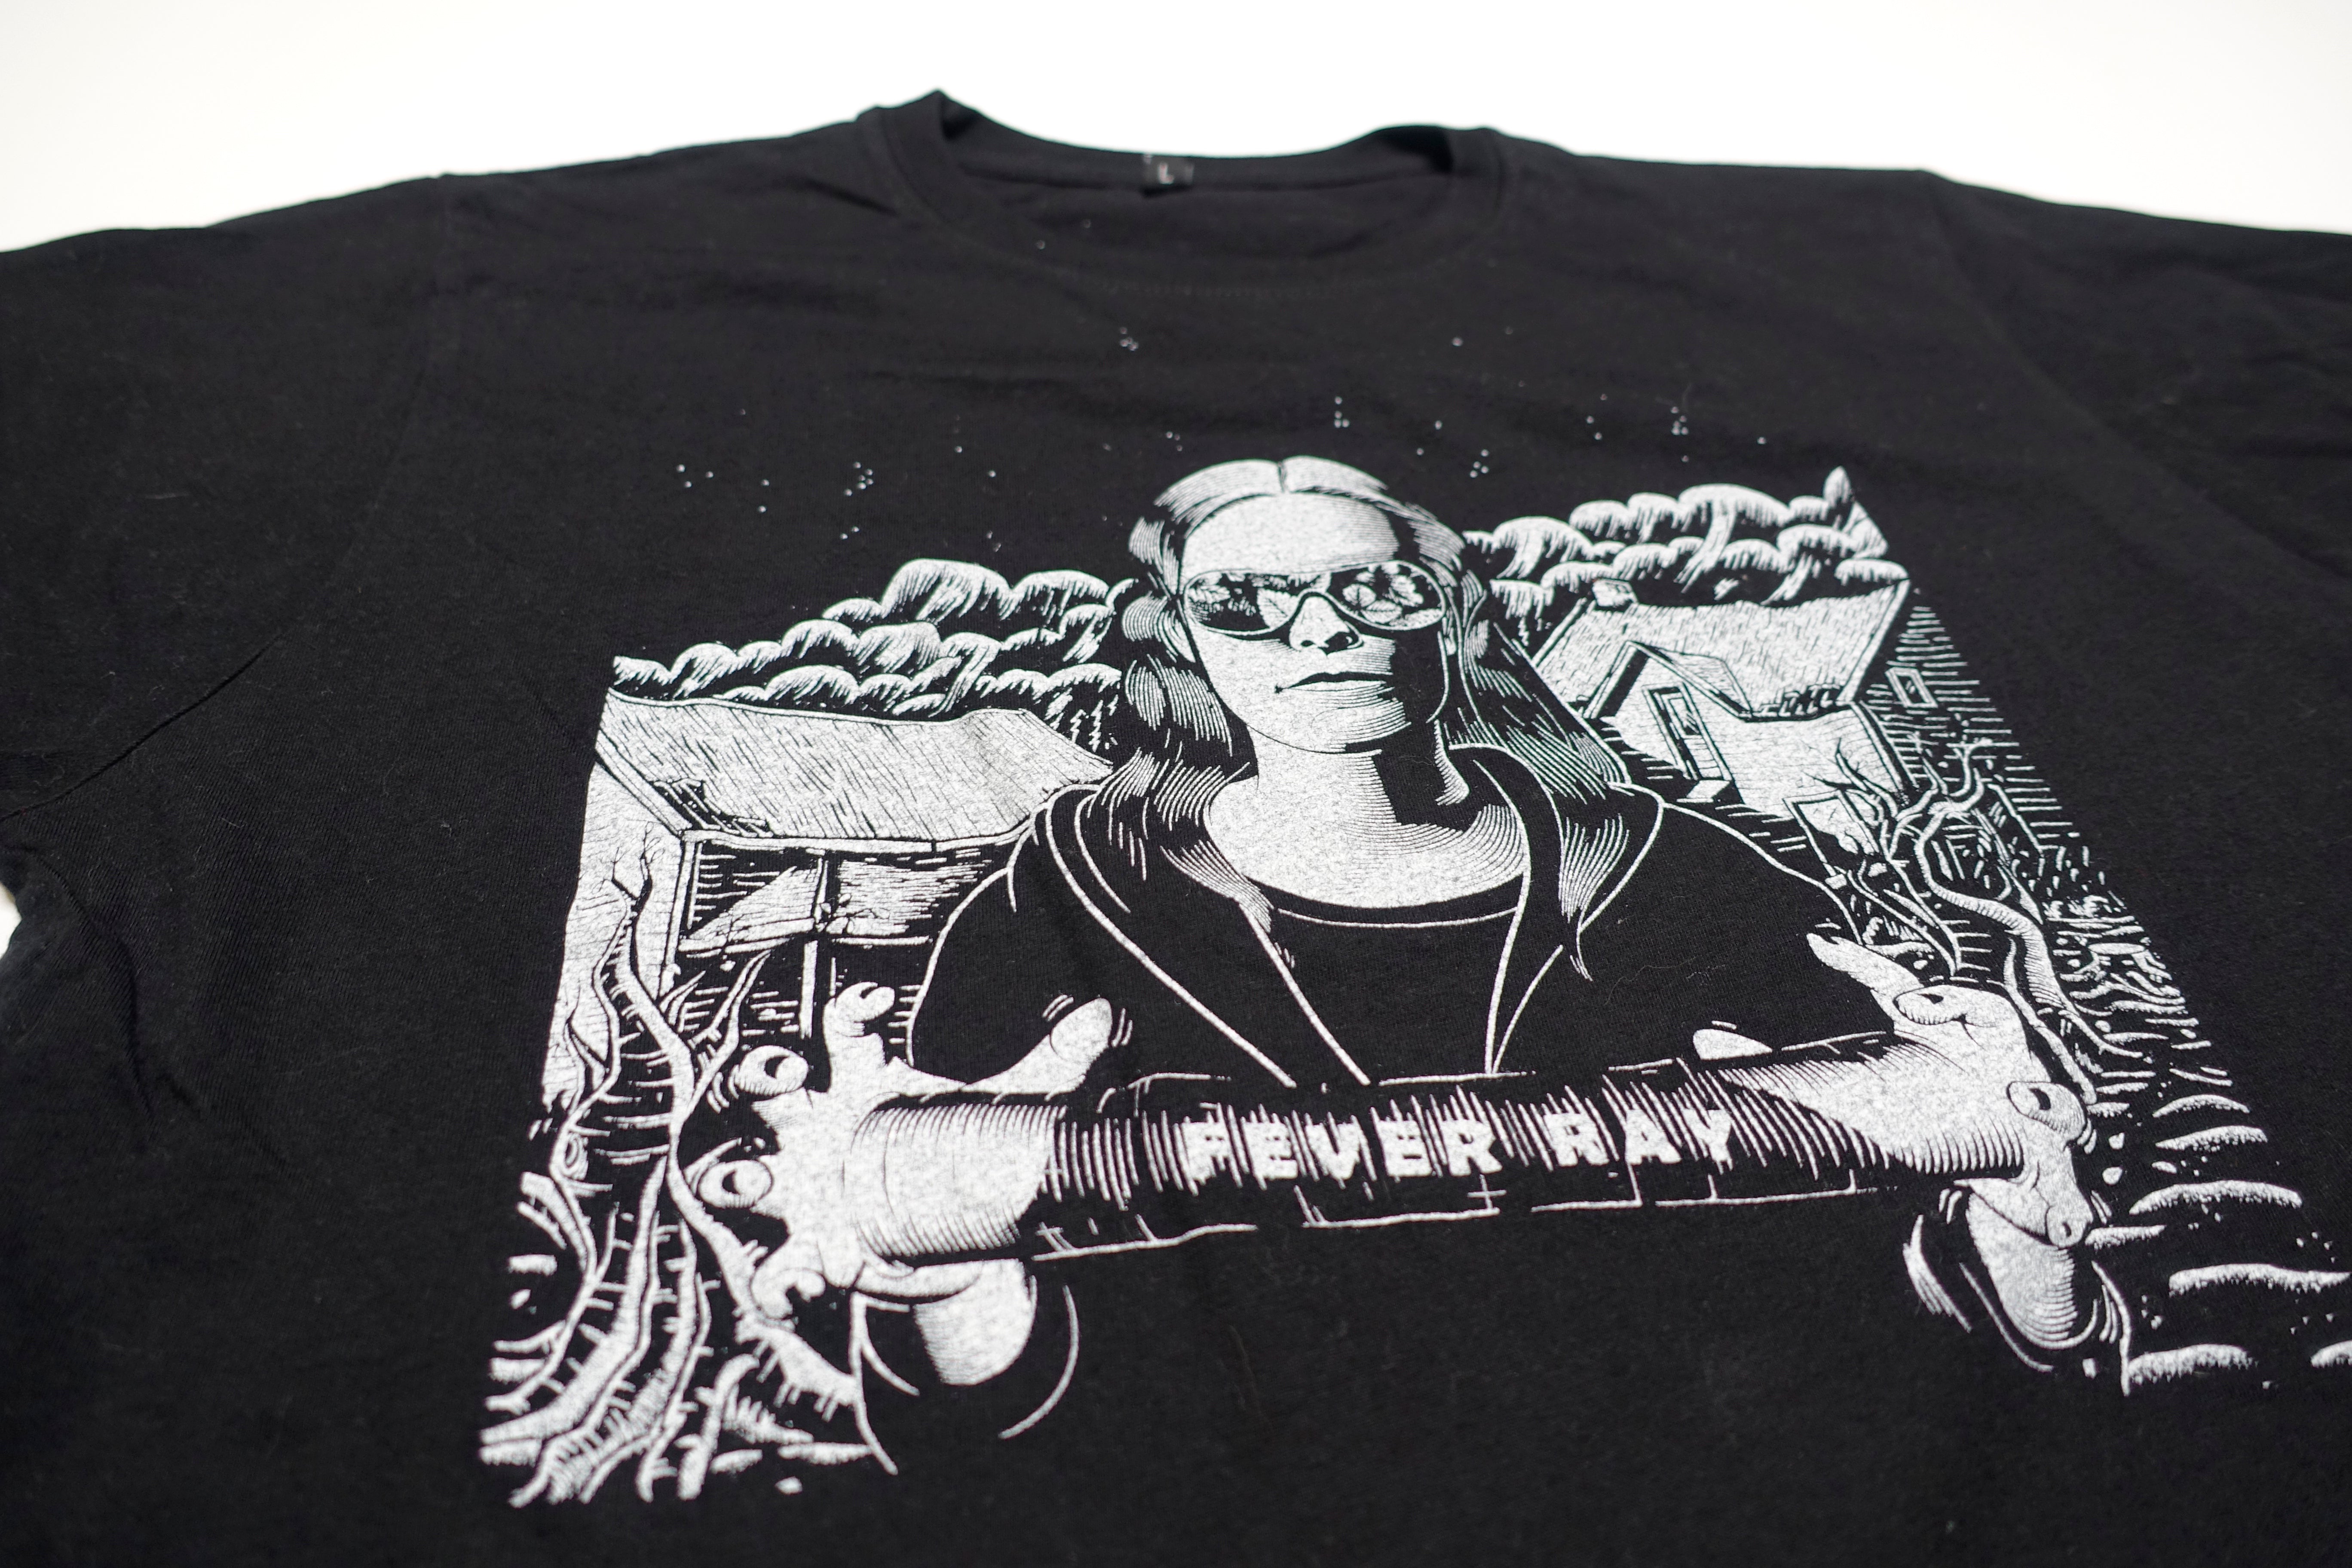 Fever Ray ‎– Fever Ray S/T 2009 Tour Shirt Size Large / Medium